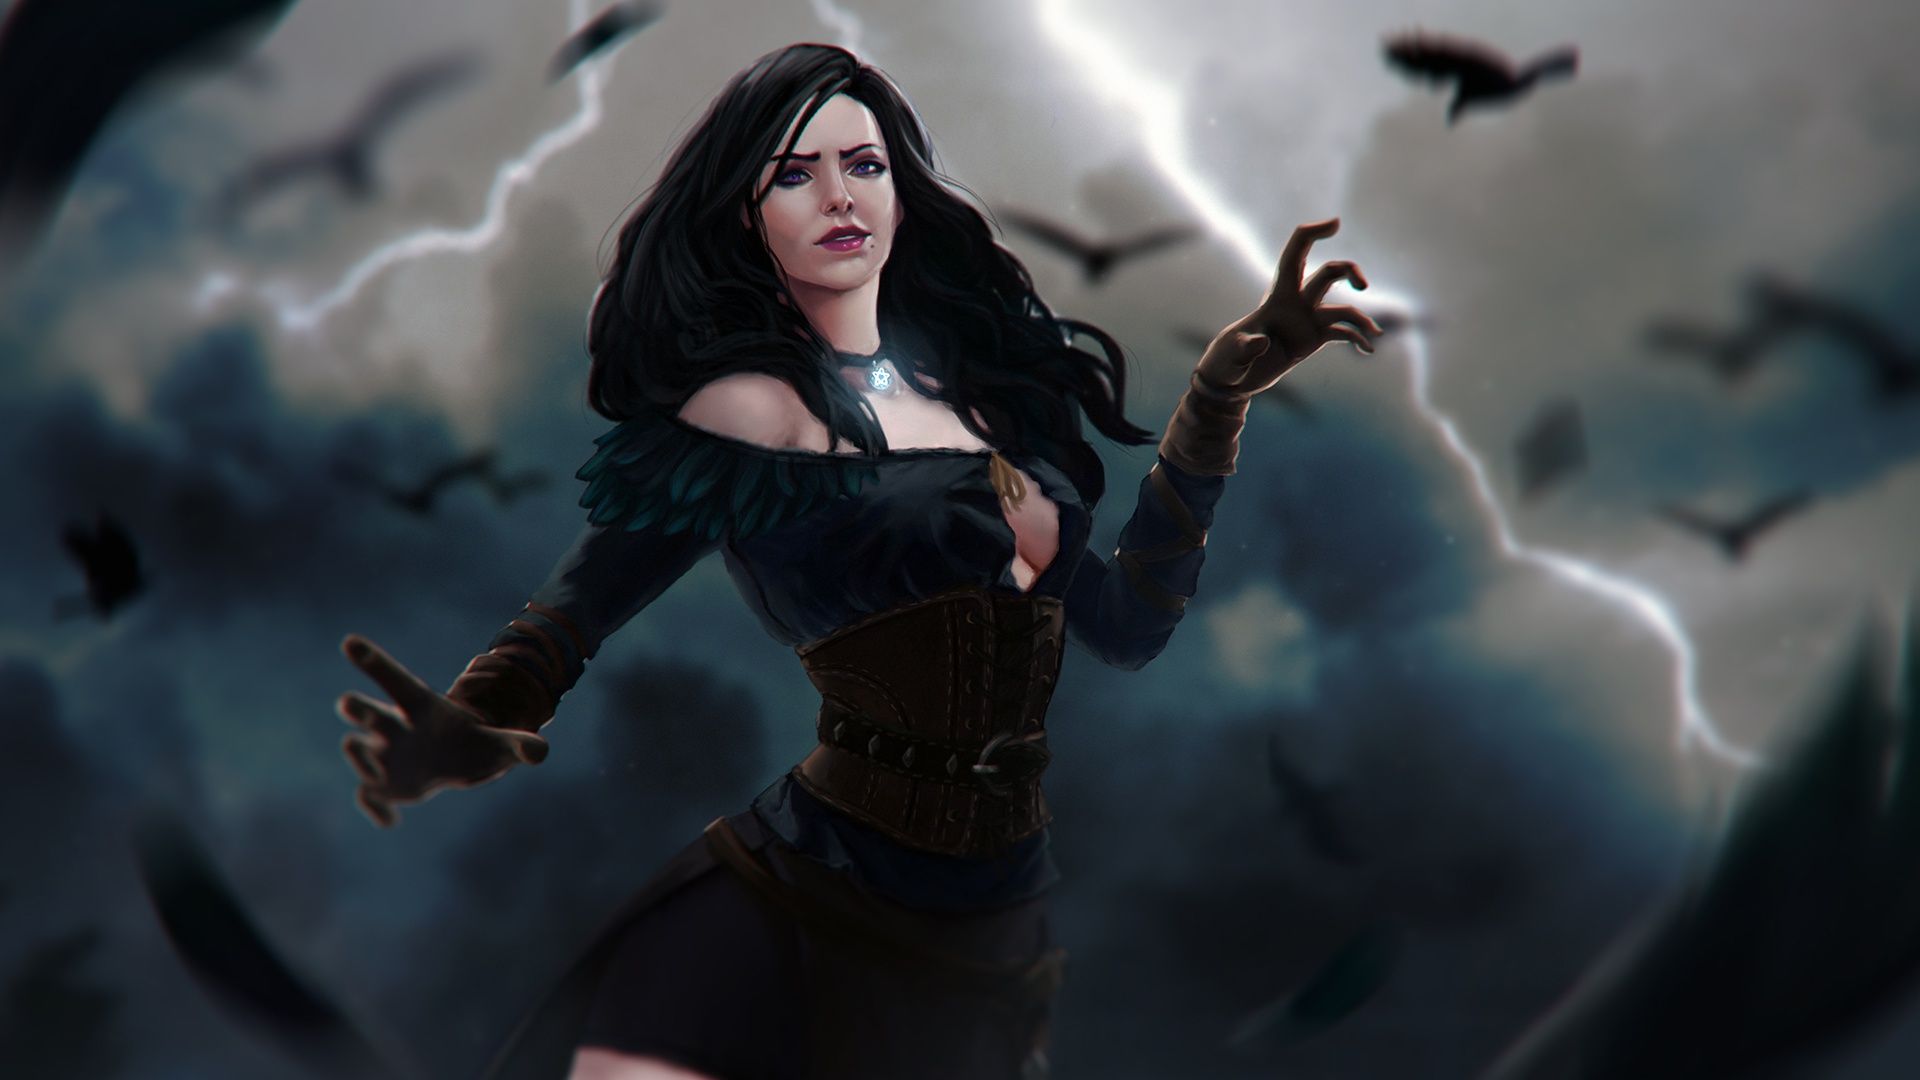 Yennefer of vengerberg the witcher 3 voiced standalone follower фото 99